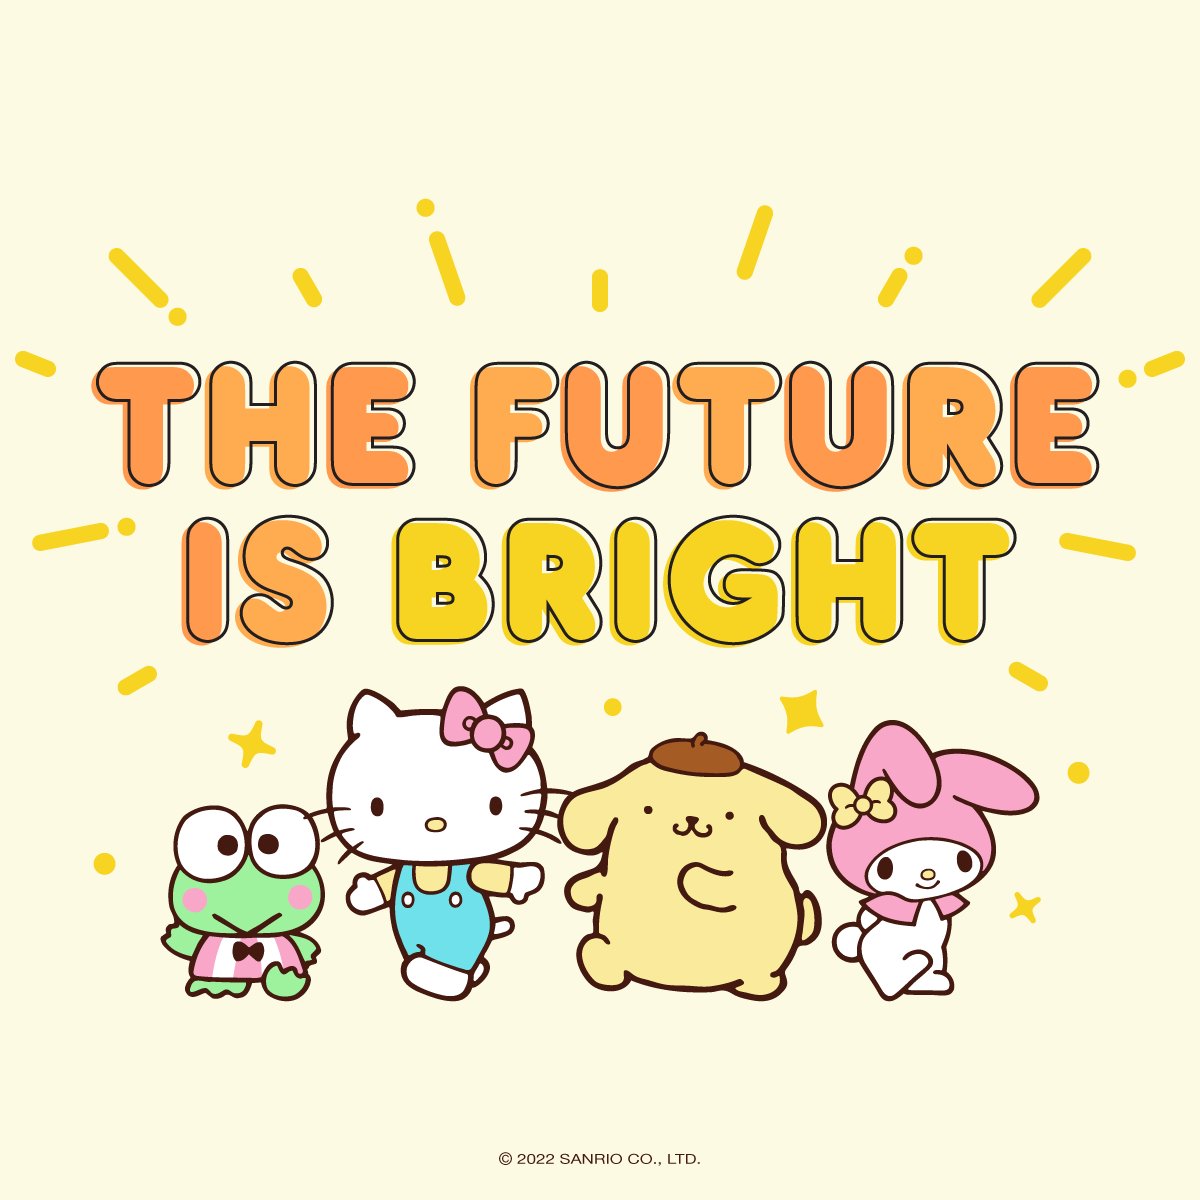 The future is bright ✨⭐✨ Tag a friend! #mondaymotivation